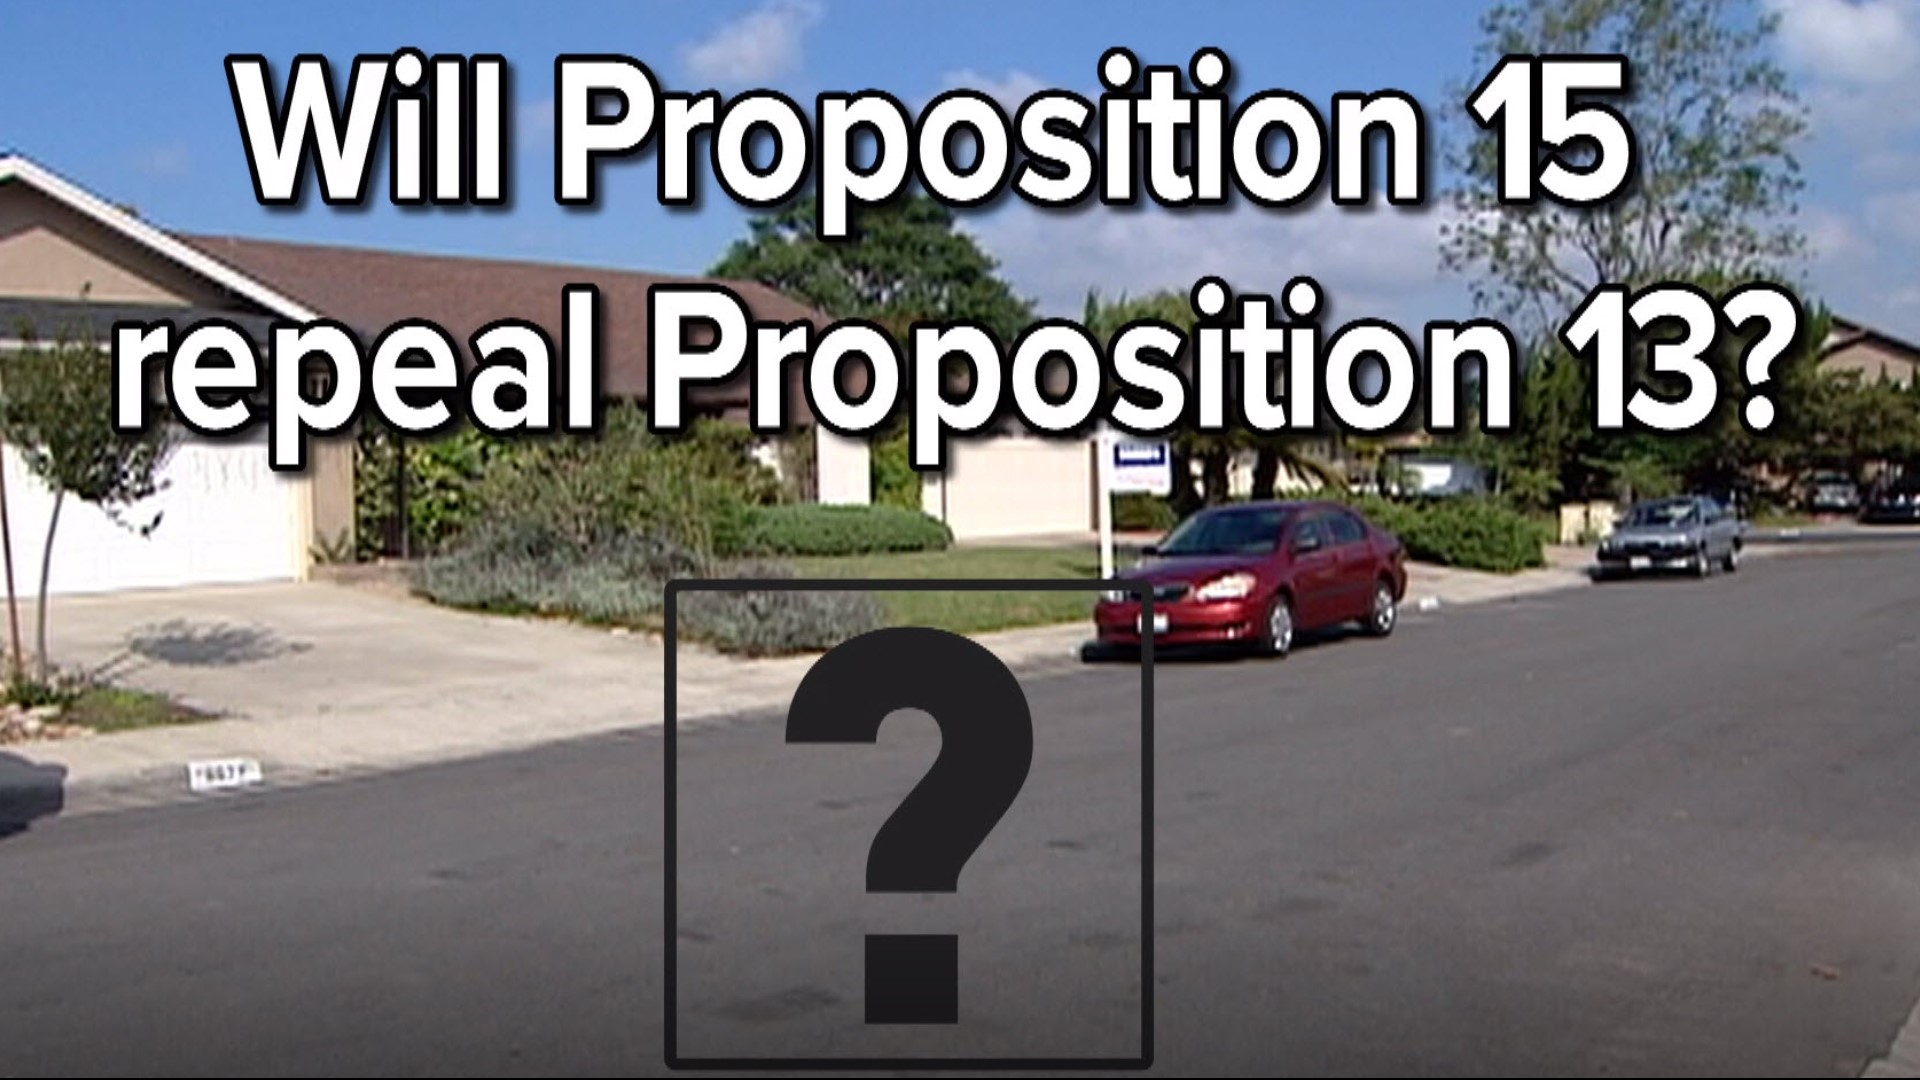 California Prop 15 explained: Increase taxes on business property